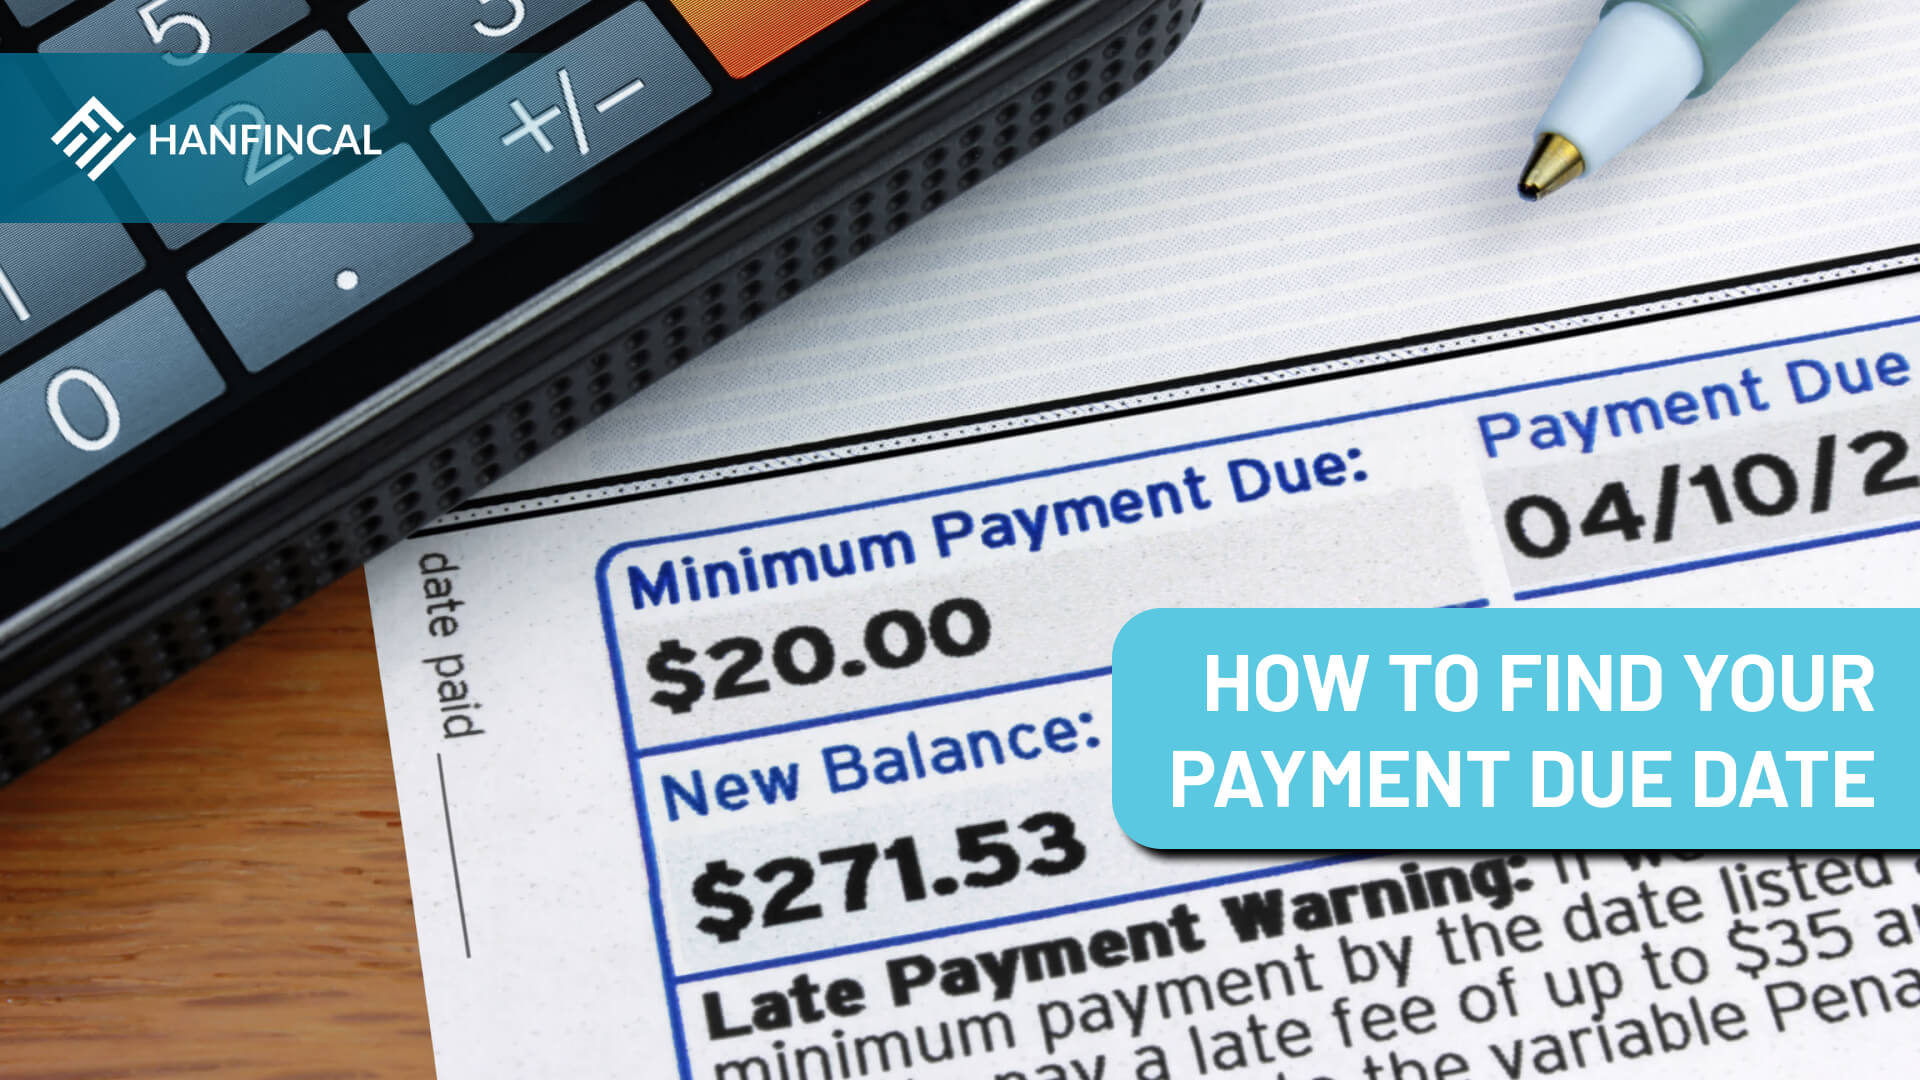 How to find your payment due date?